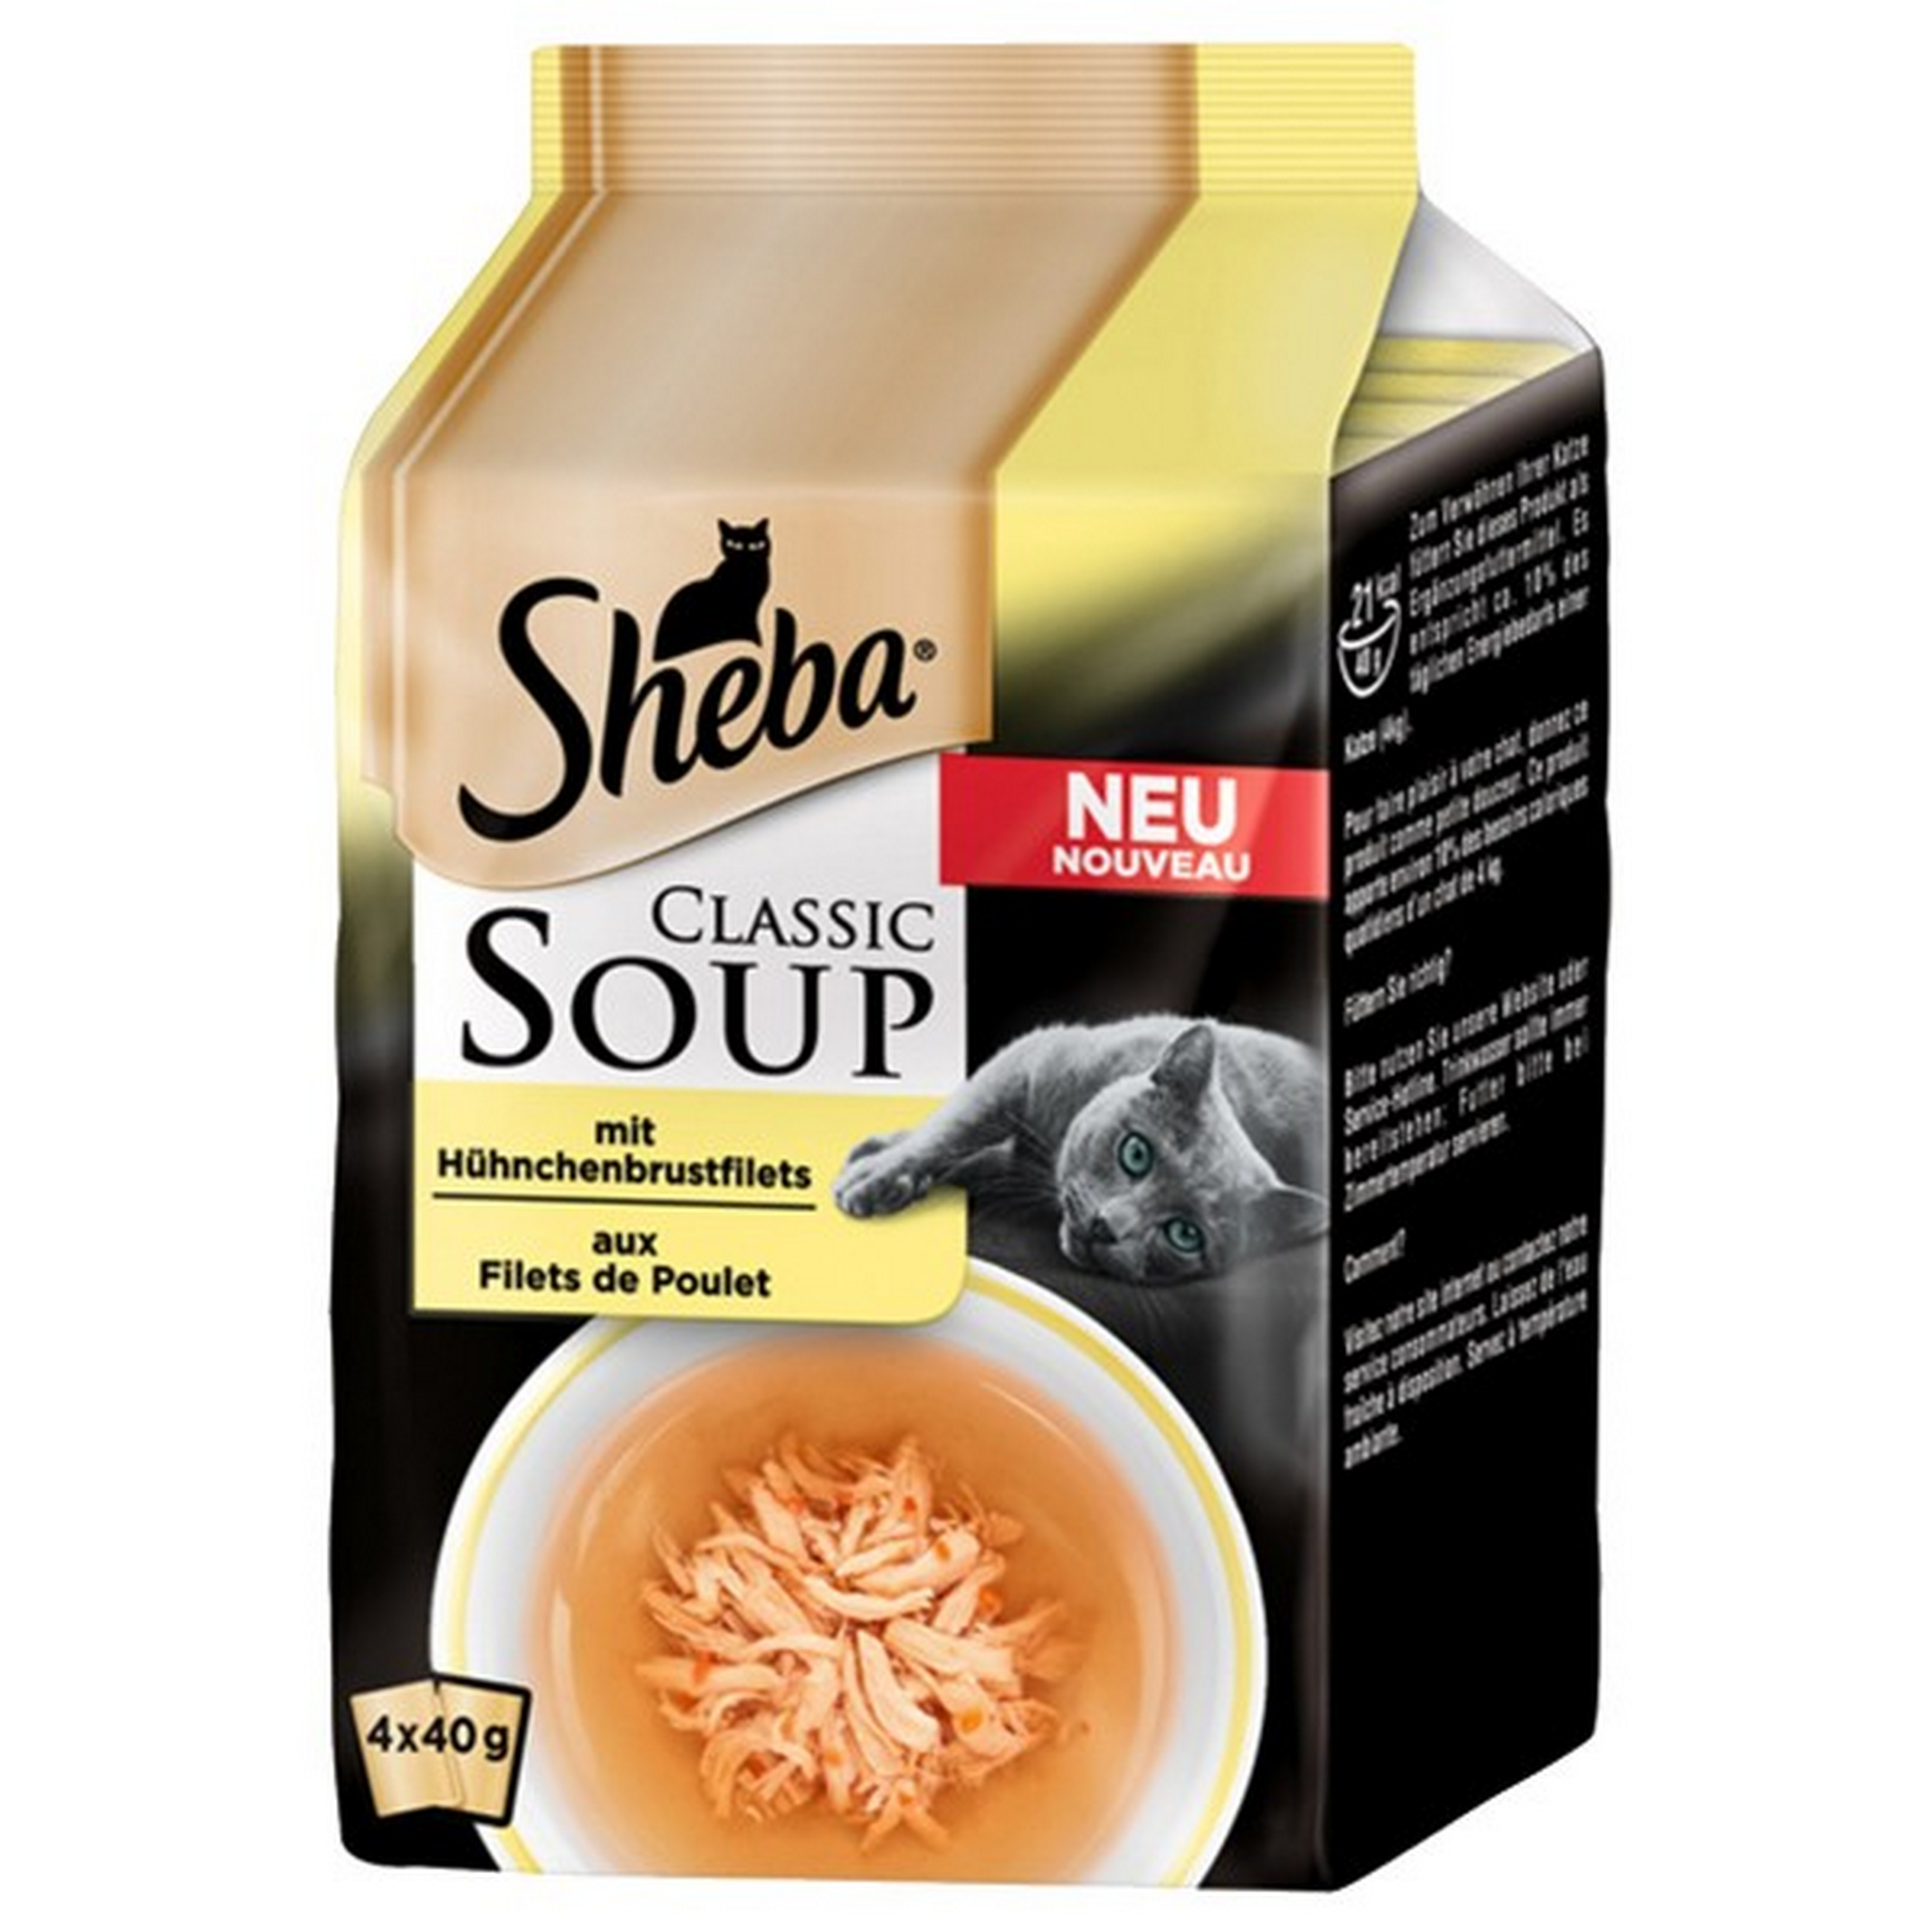 Sheba 'Soup' Hühnchenbrustfilet Multipack 4 x 40 g + product picture